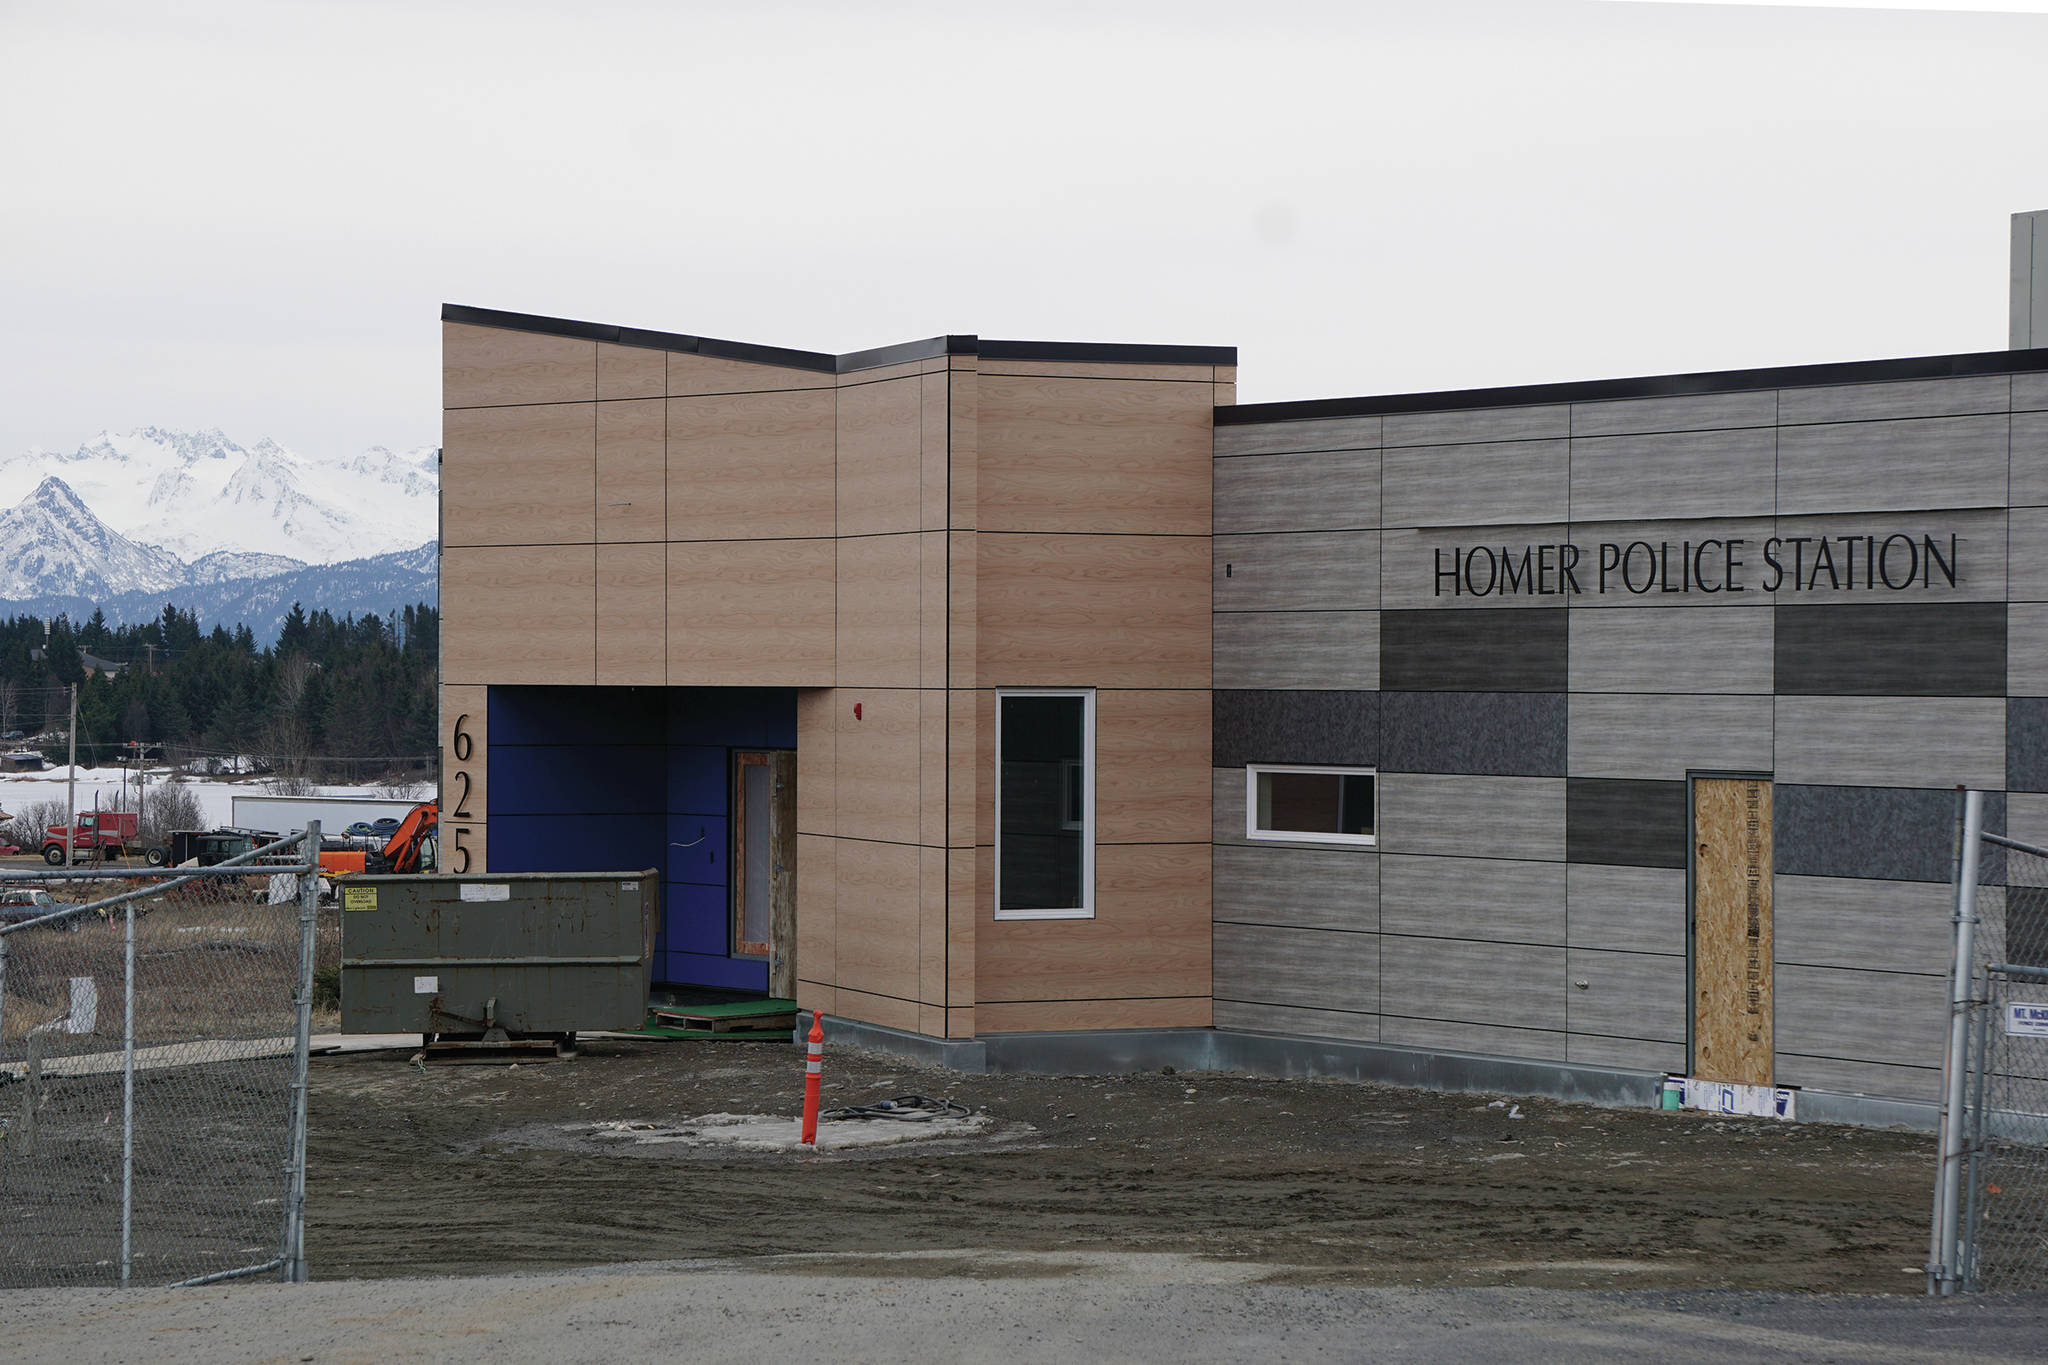 Exterior work on the new Homer Police Station on Grubstake Avenue is almost done as seen on Saturday, April 11, 2020, in Homer, Alaska. (Photo by Michael Armstrong/Homer News)